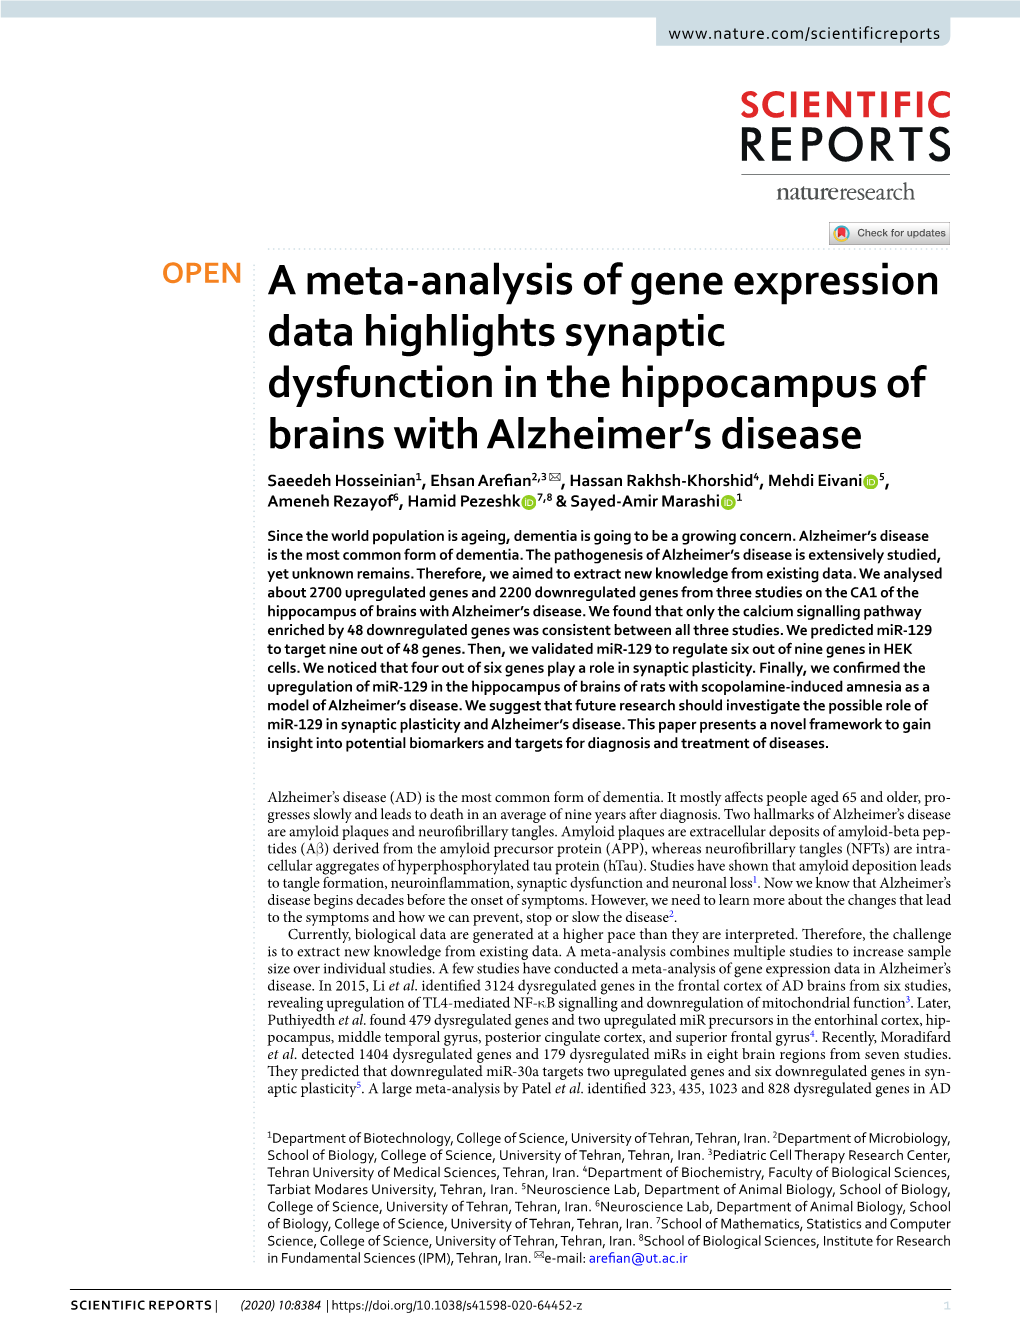 A Meta-Analysis of Gene Expression Data Highlights Synaptic Dysfunction